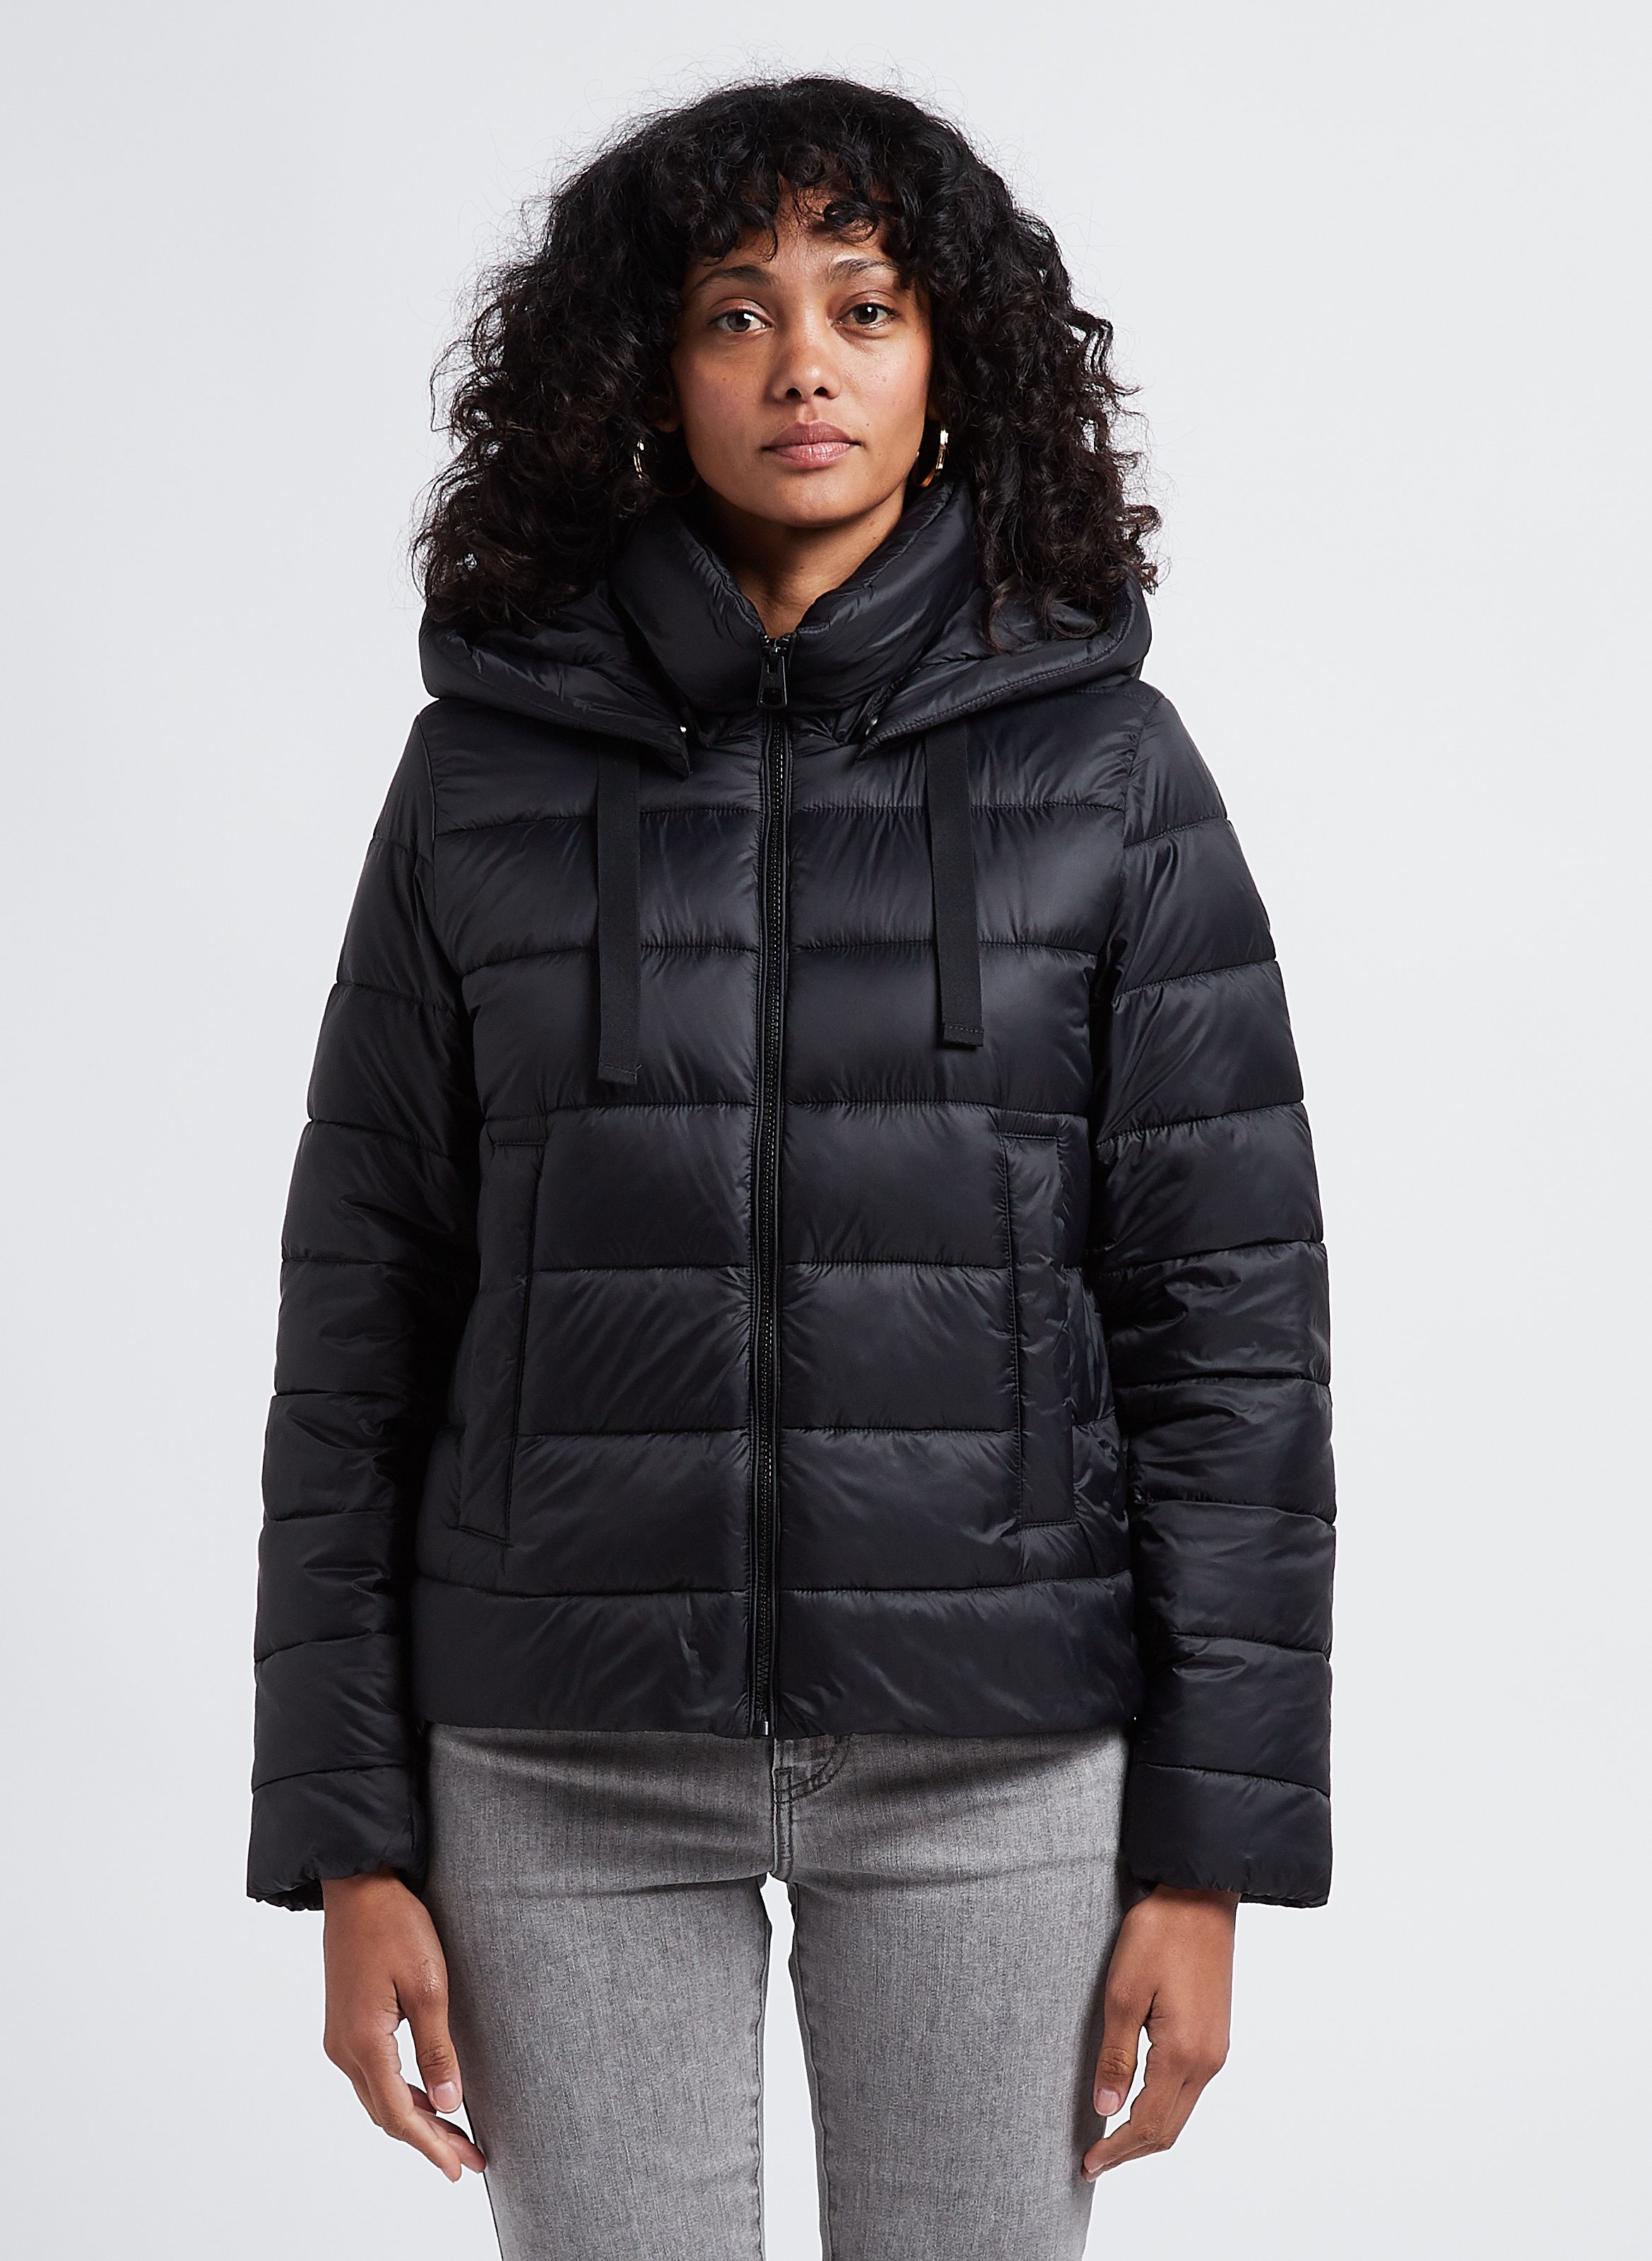 Marc O'Polo Woven Outdoor Jackets - 194.97 €. Buy Padded jackets from Marc O 'Polo online at Boozt.com. Fast delivery and easy returns